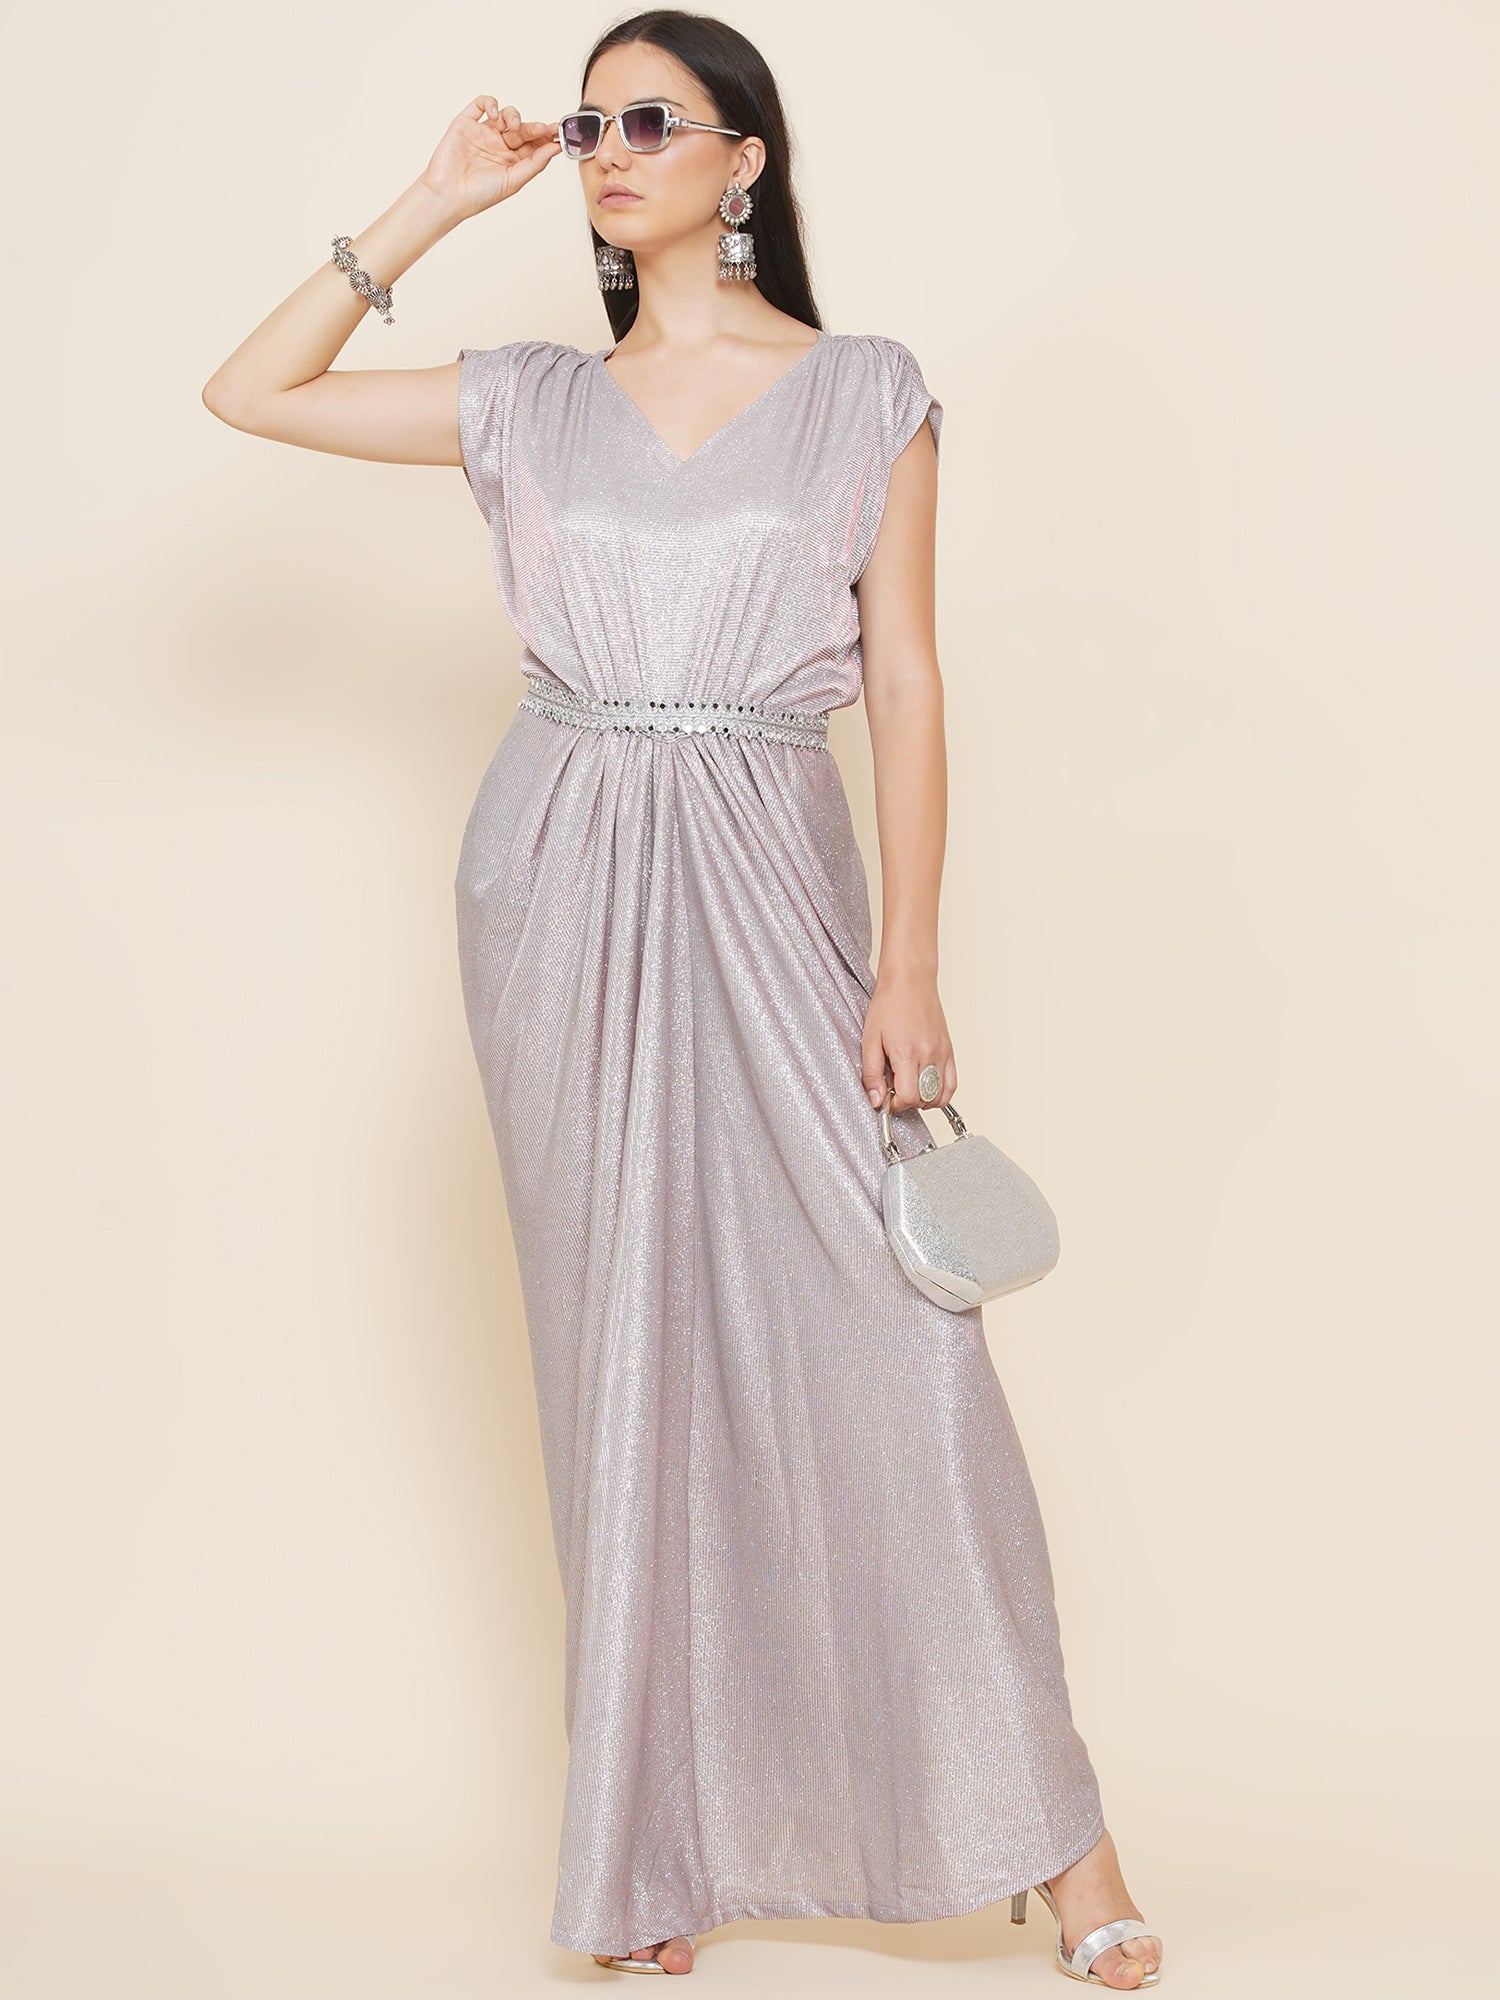 Dresses Guide: Top Tips on Picking Trendy Evening Gowns - JJ's House